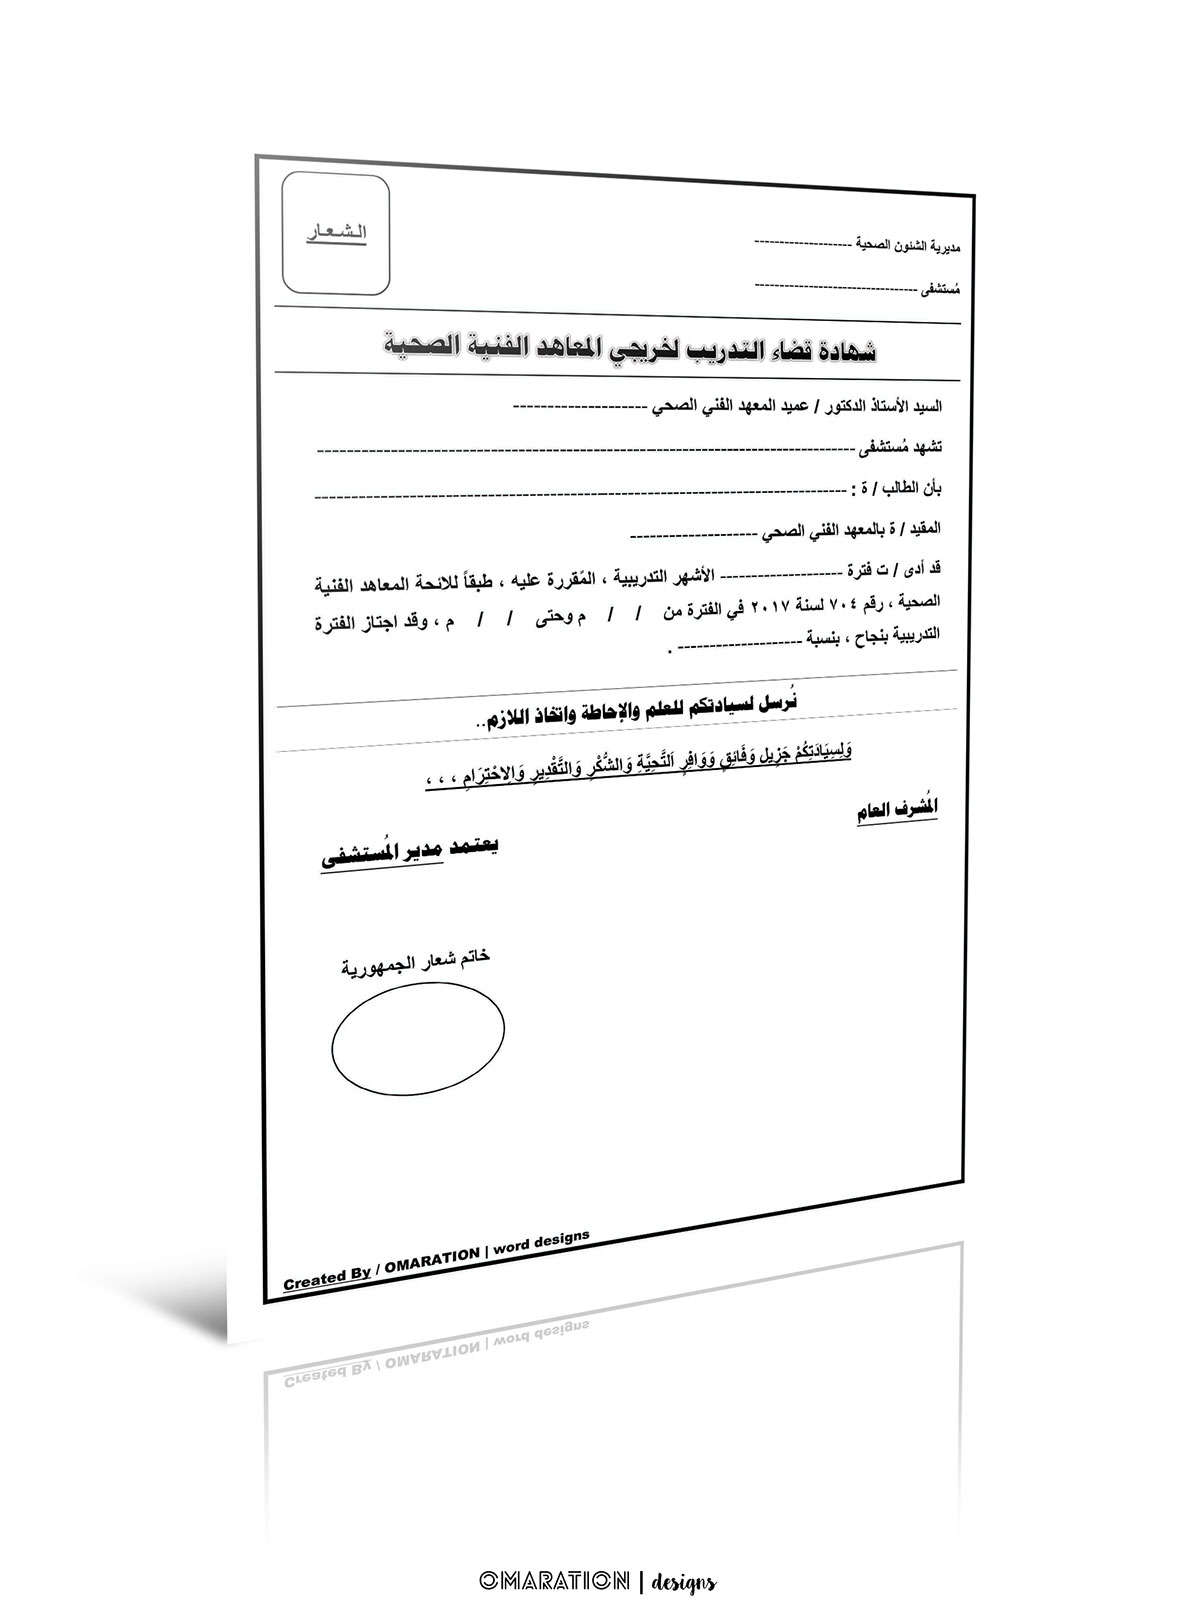 Training Certificate Template For Graduates Of Health Technical Institutes rendition image